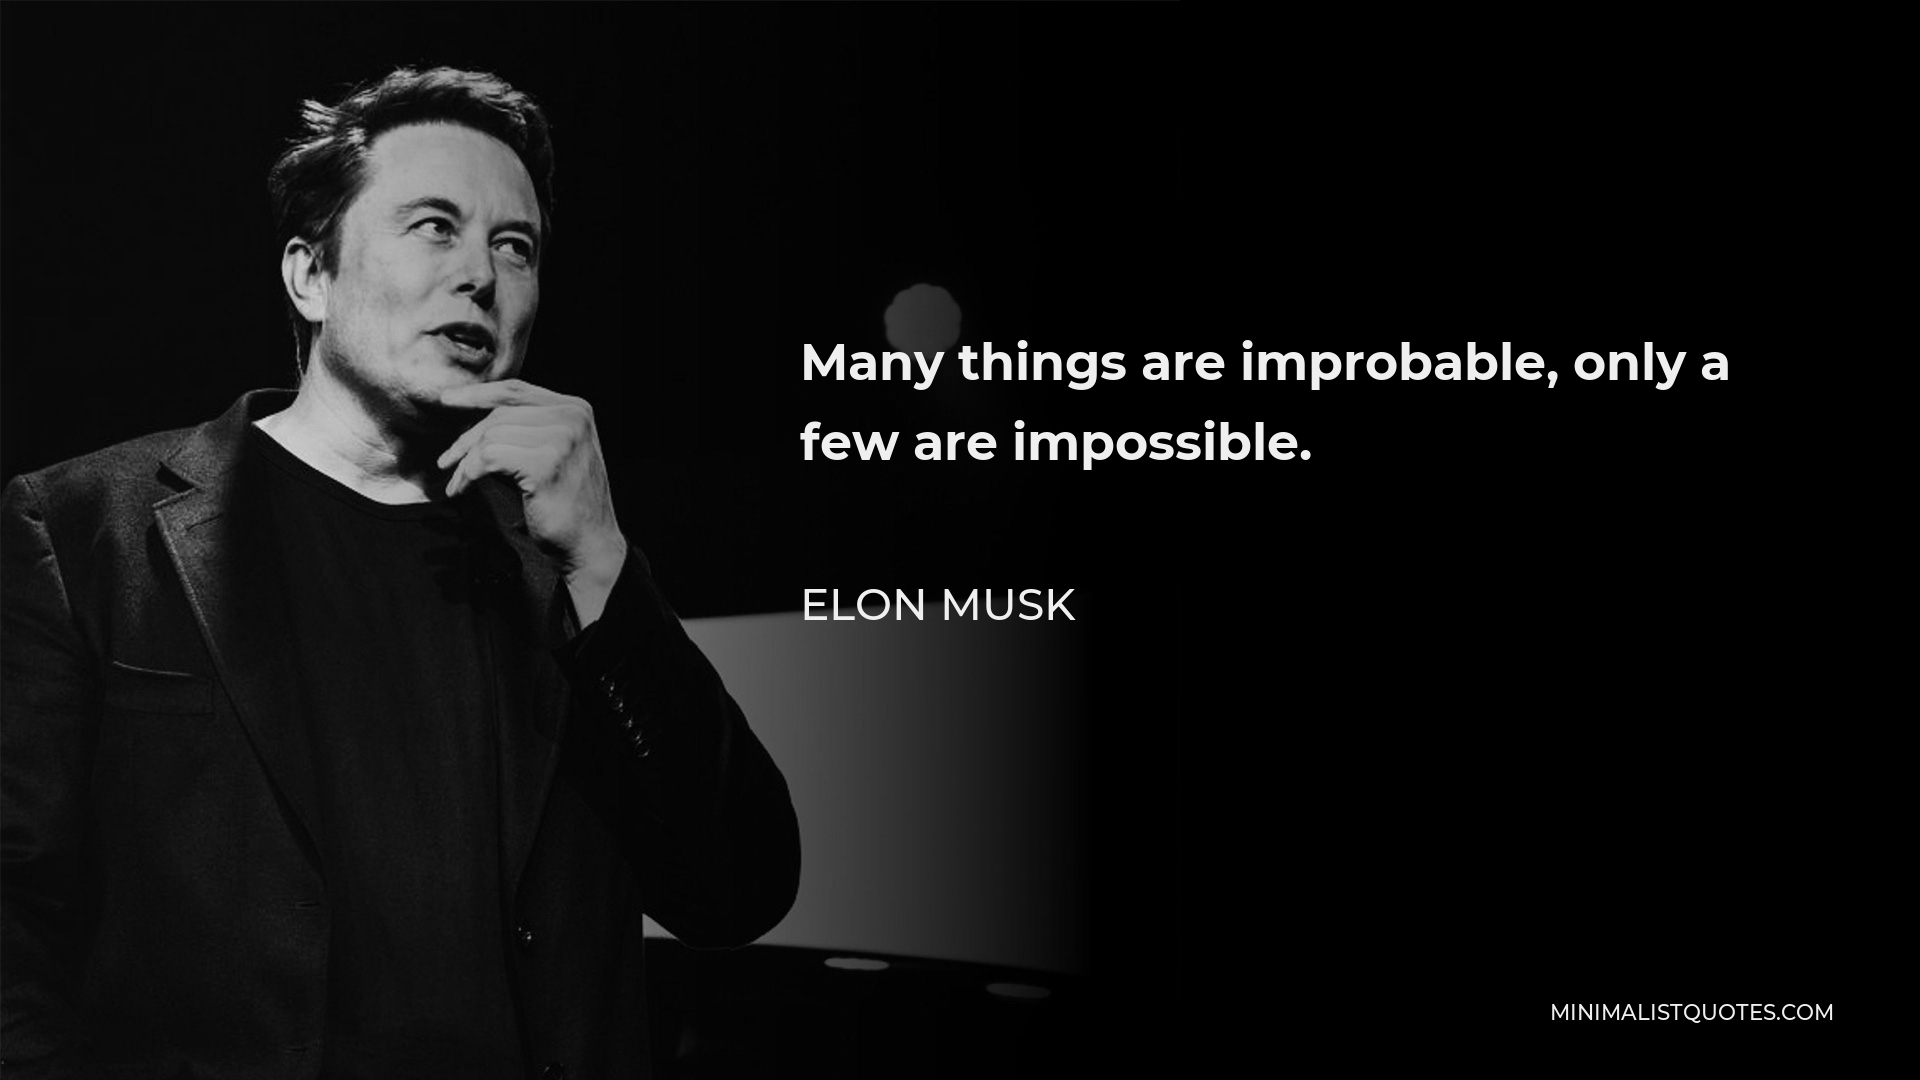 Elon Musk Quote - Many things are improbable, only a few are impossible.